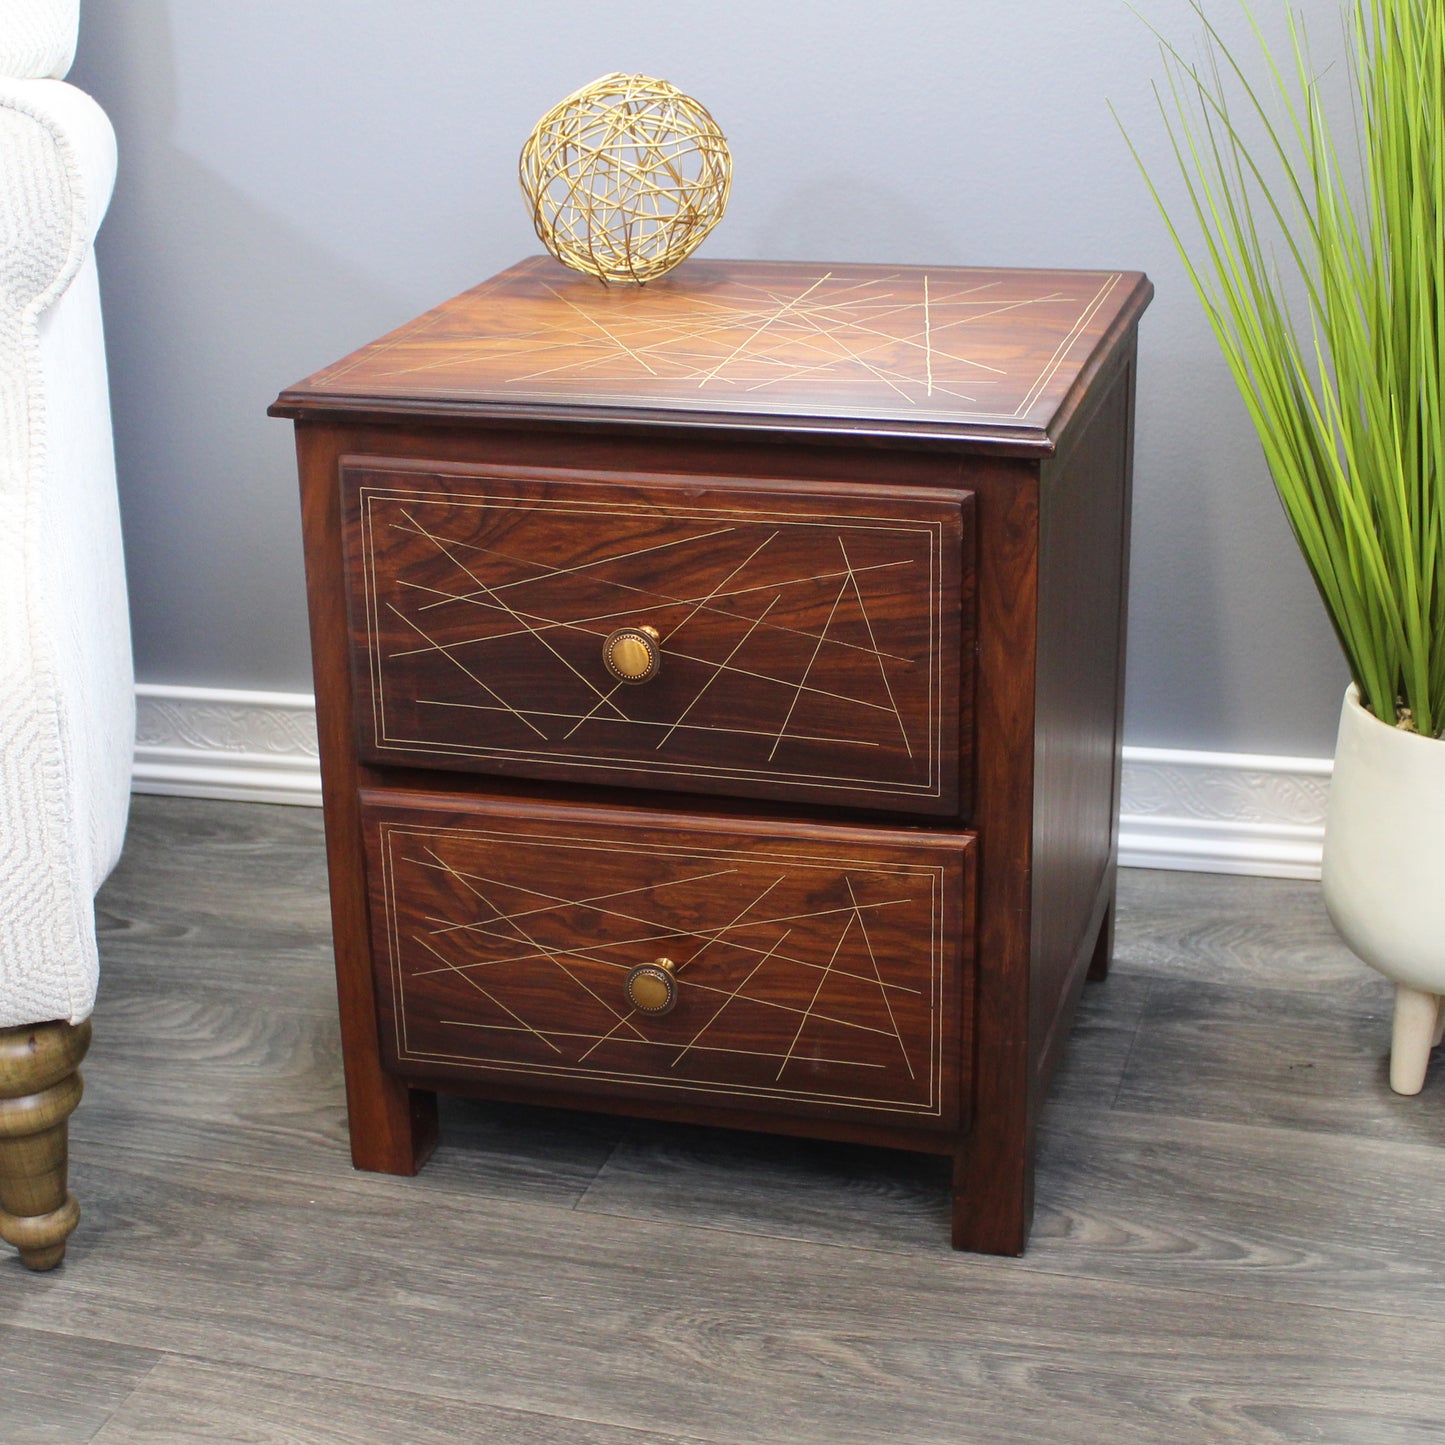 Natural Geo Rosewood Square Wooden End Table - Abstract Golden Brass Inlay